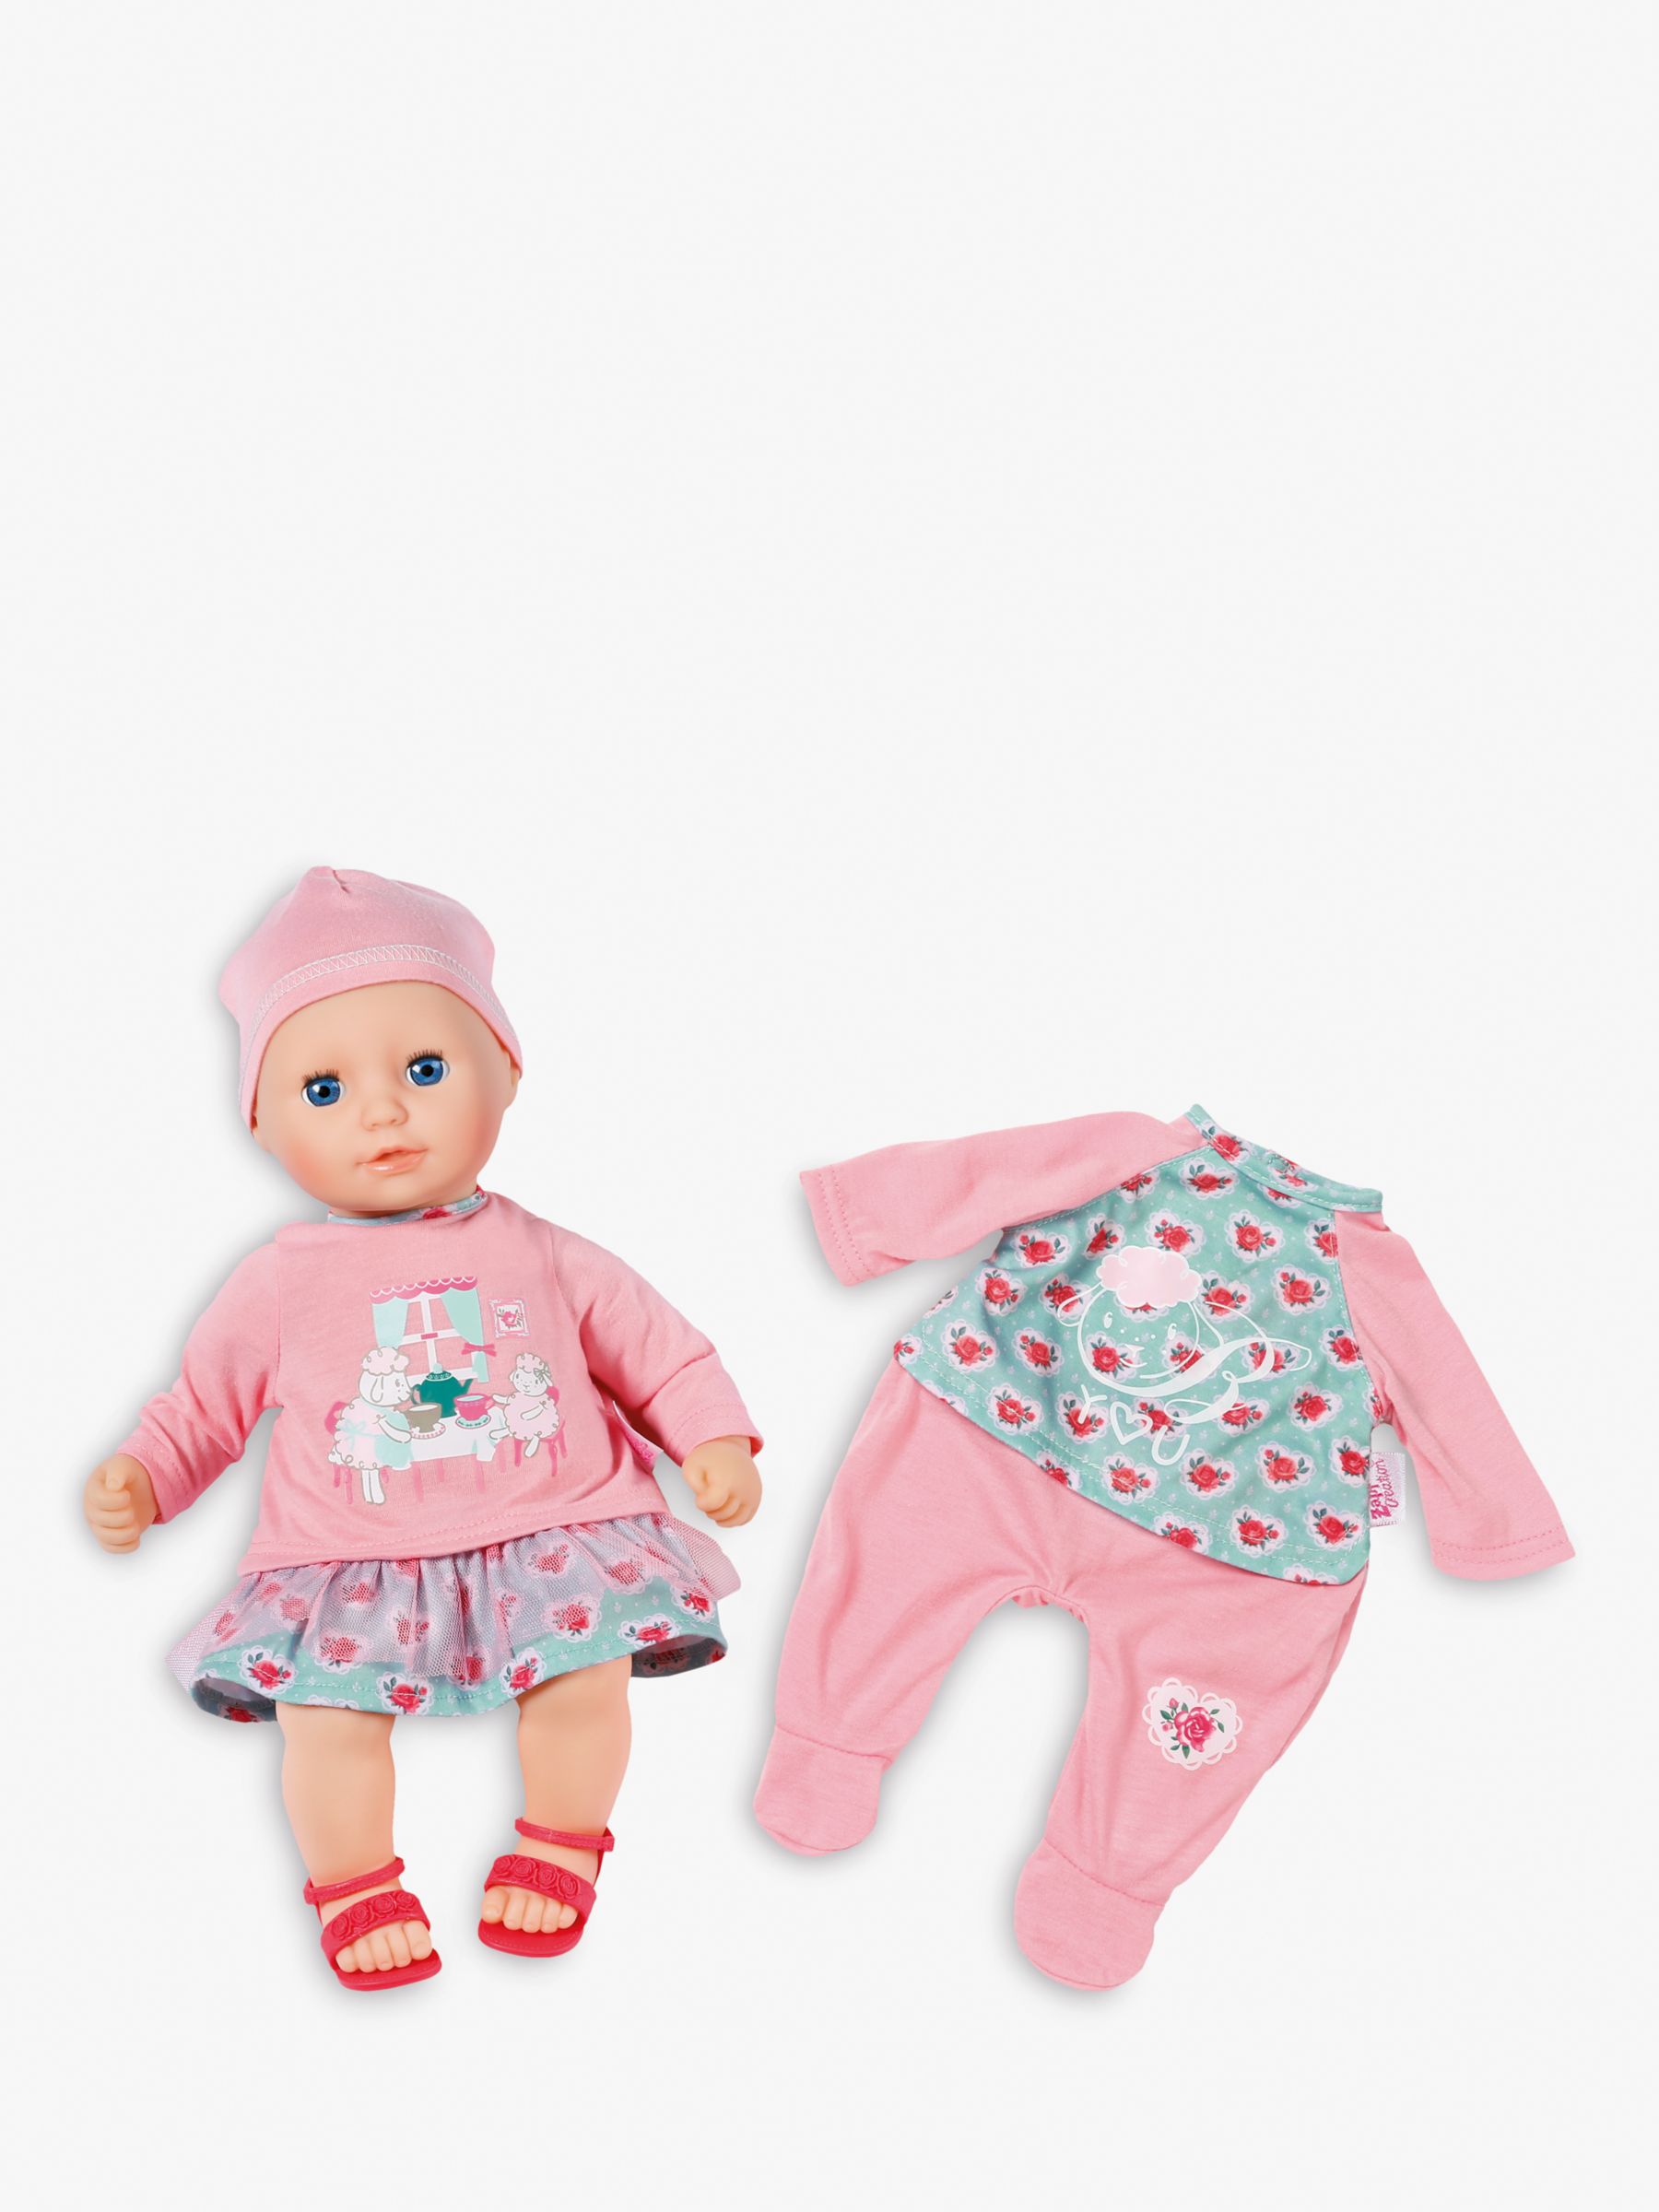 clothes for baby annabell doll